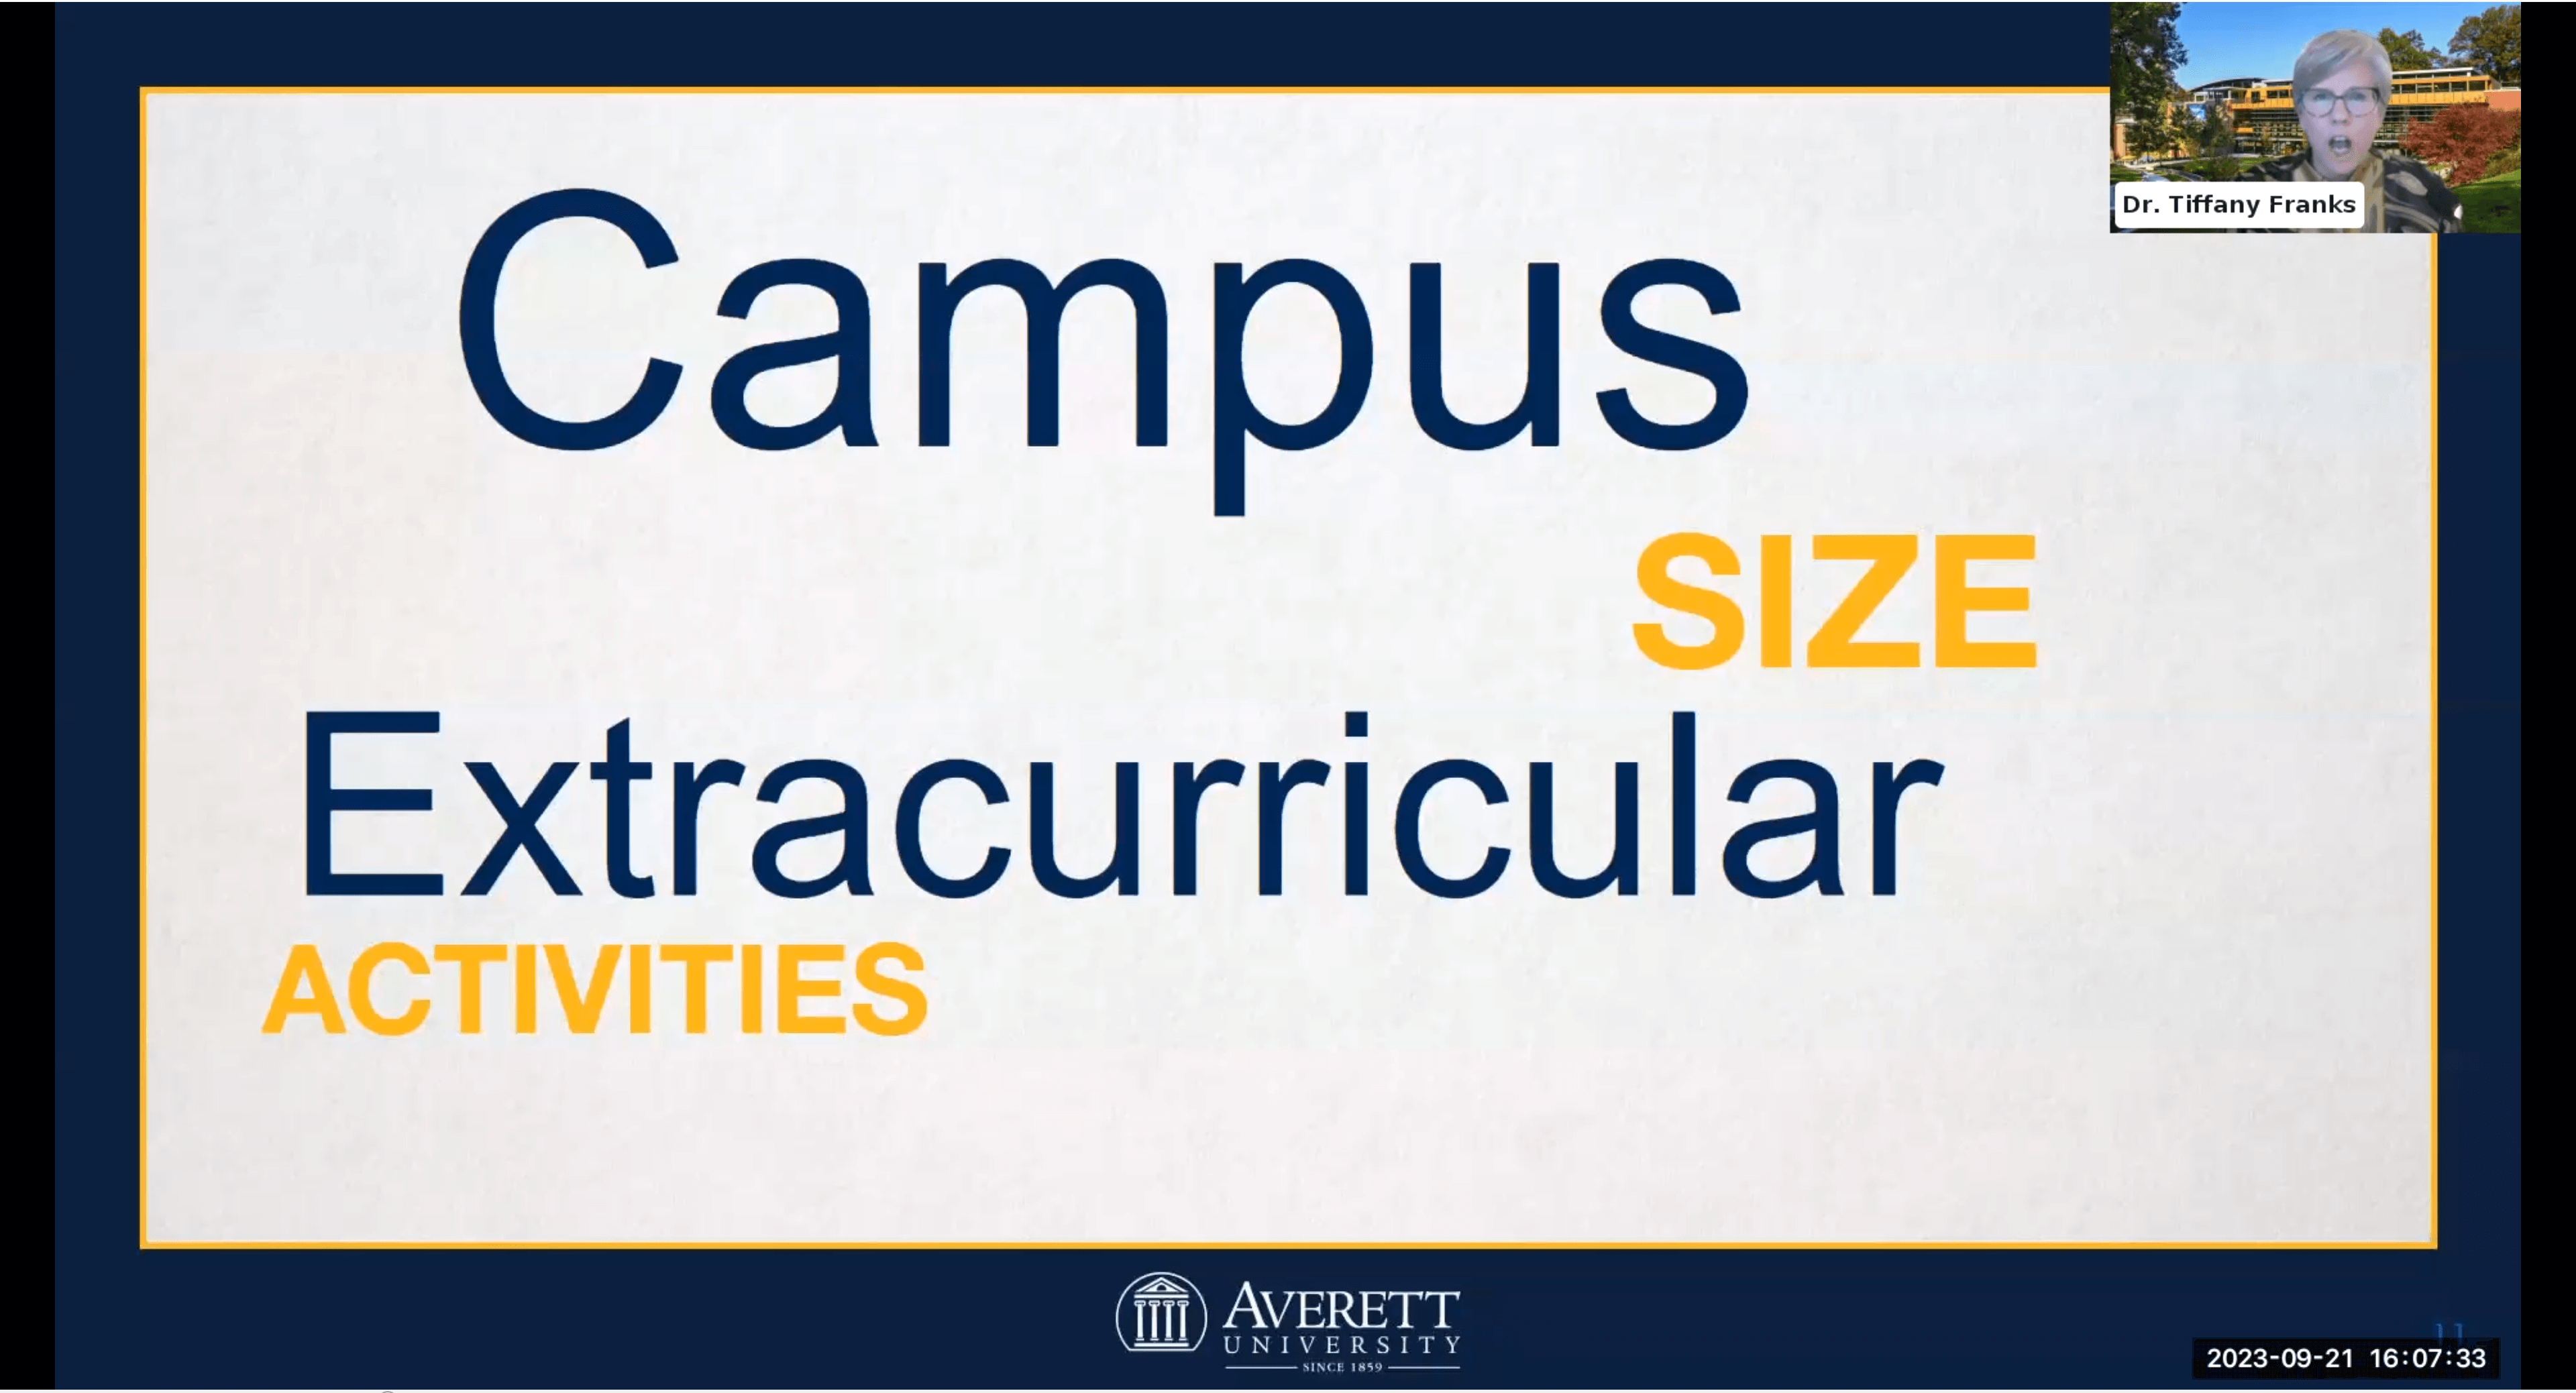 Specify campus size and extracurricular activities that matter to you.